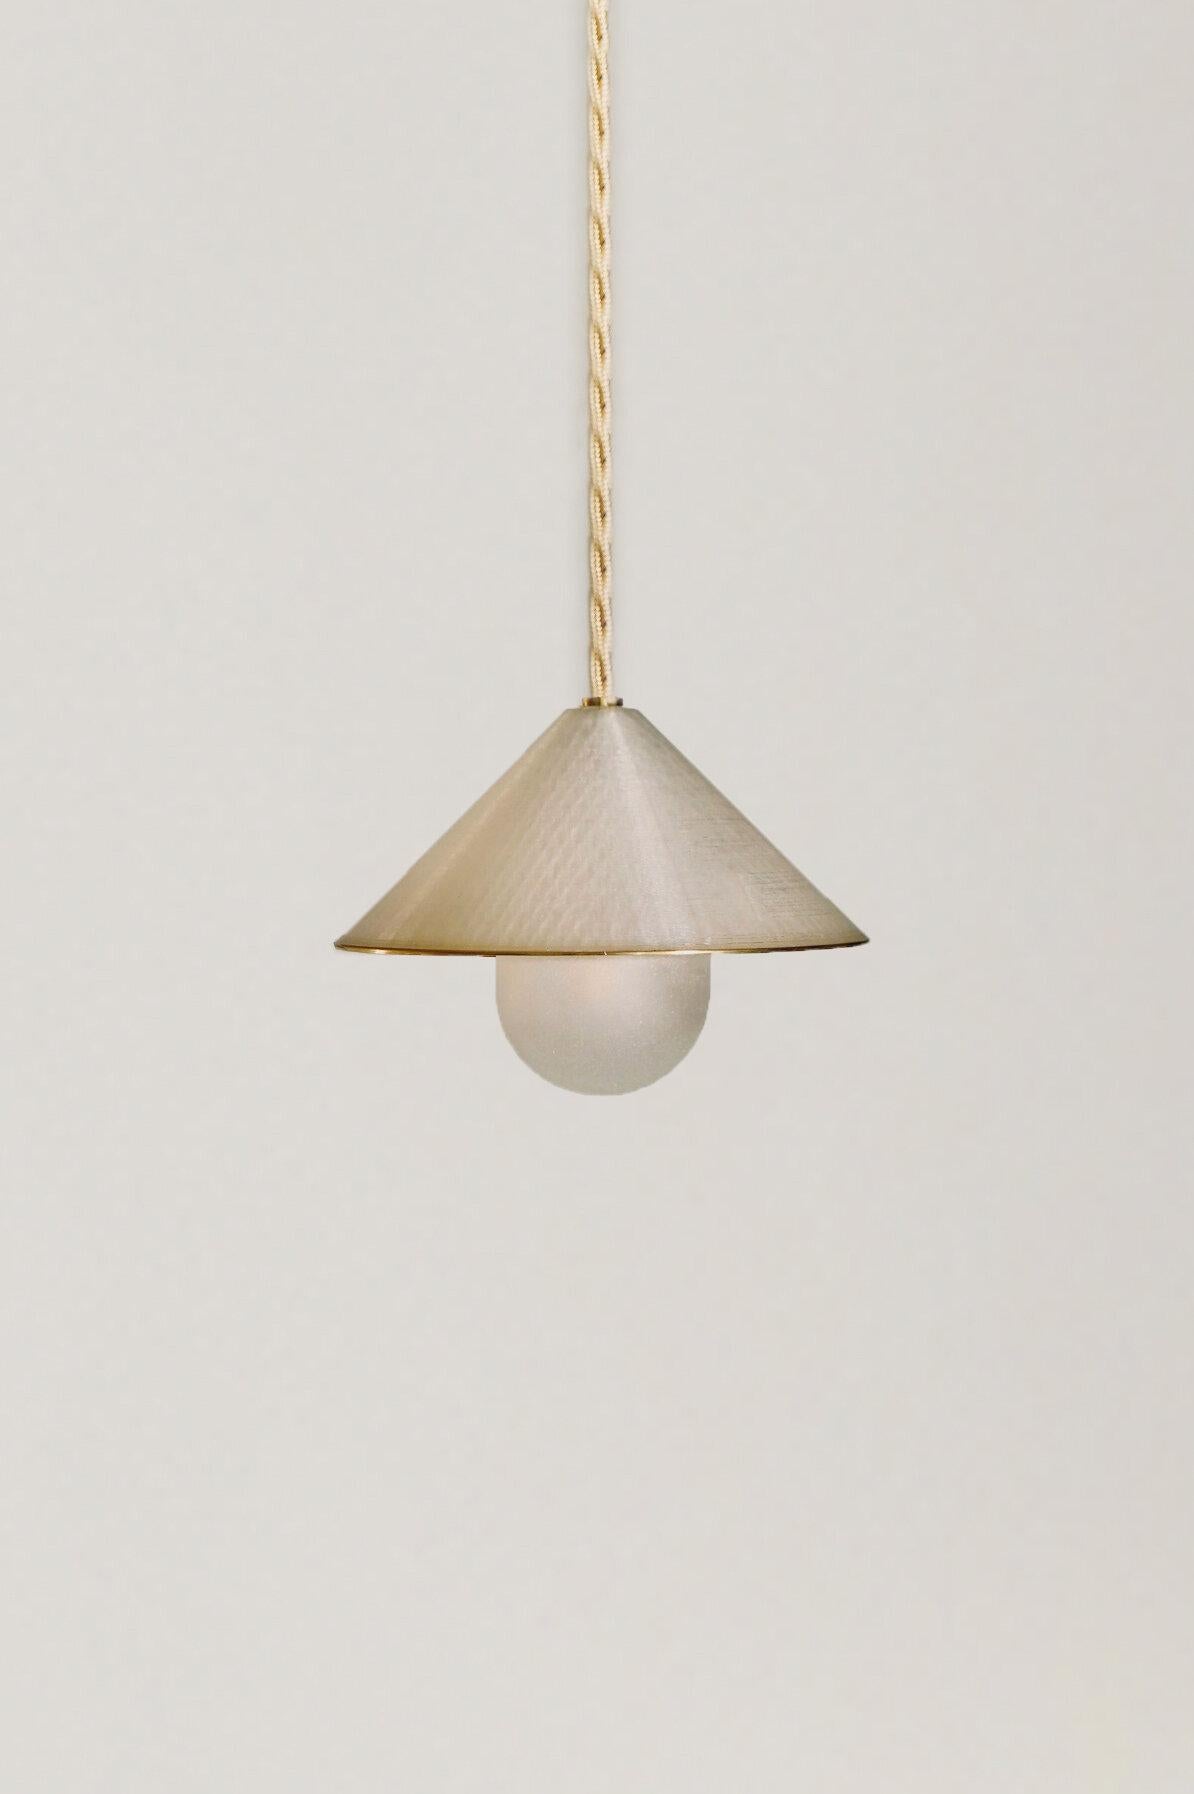 Alba Top Pendant by Contain
Dimensions: D15x H100 cm (custom leght)
Materials: Brass, 3D printed PLA structure and optical lens.
Also available in different finishes.

All our lamps can be wired according to each country. If sold to the USA it